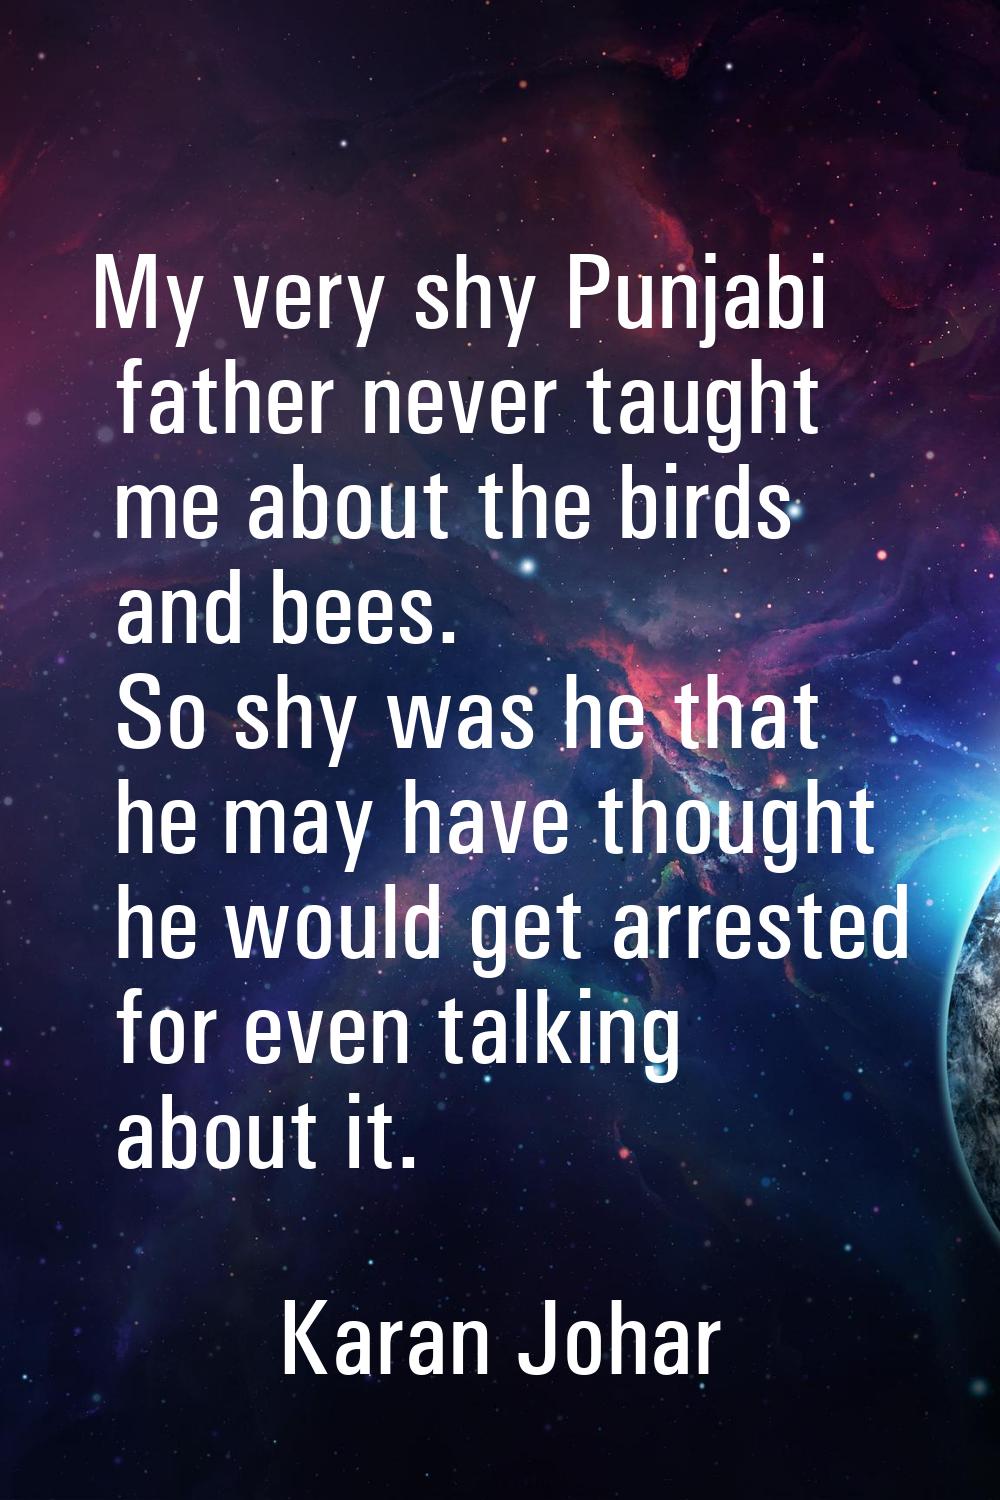 My very shy Punjabi father never taught me about the birds and bees. So shy was he that he may have